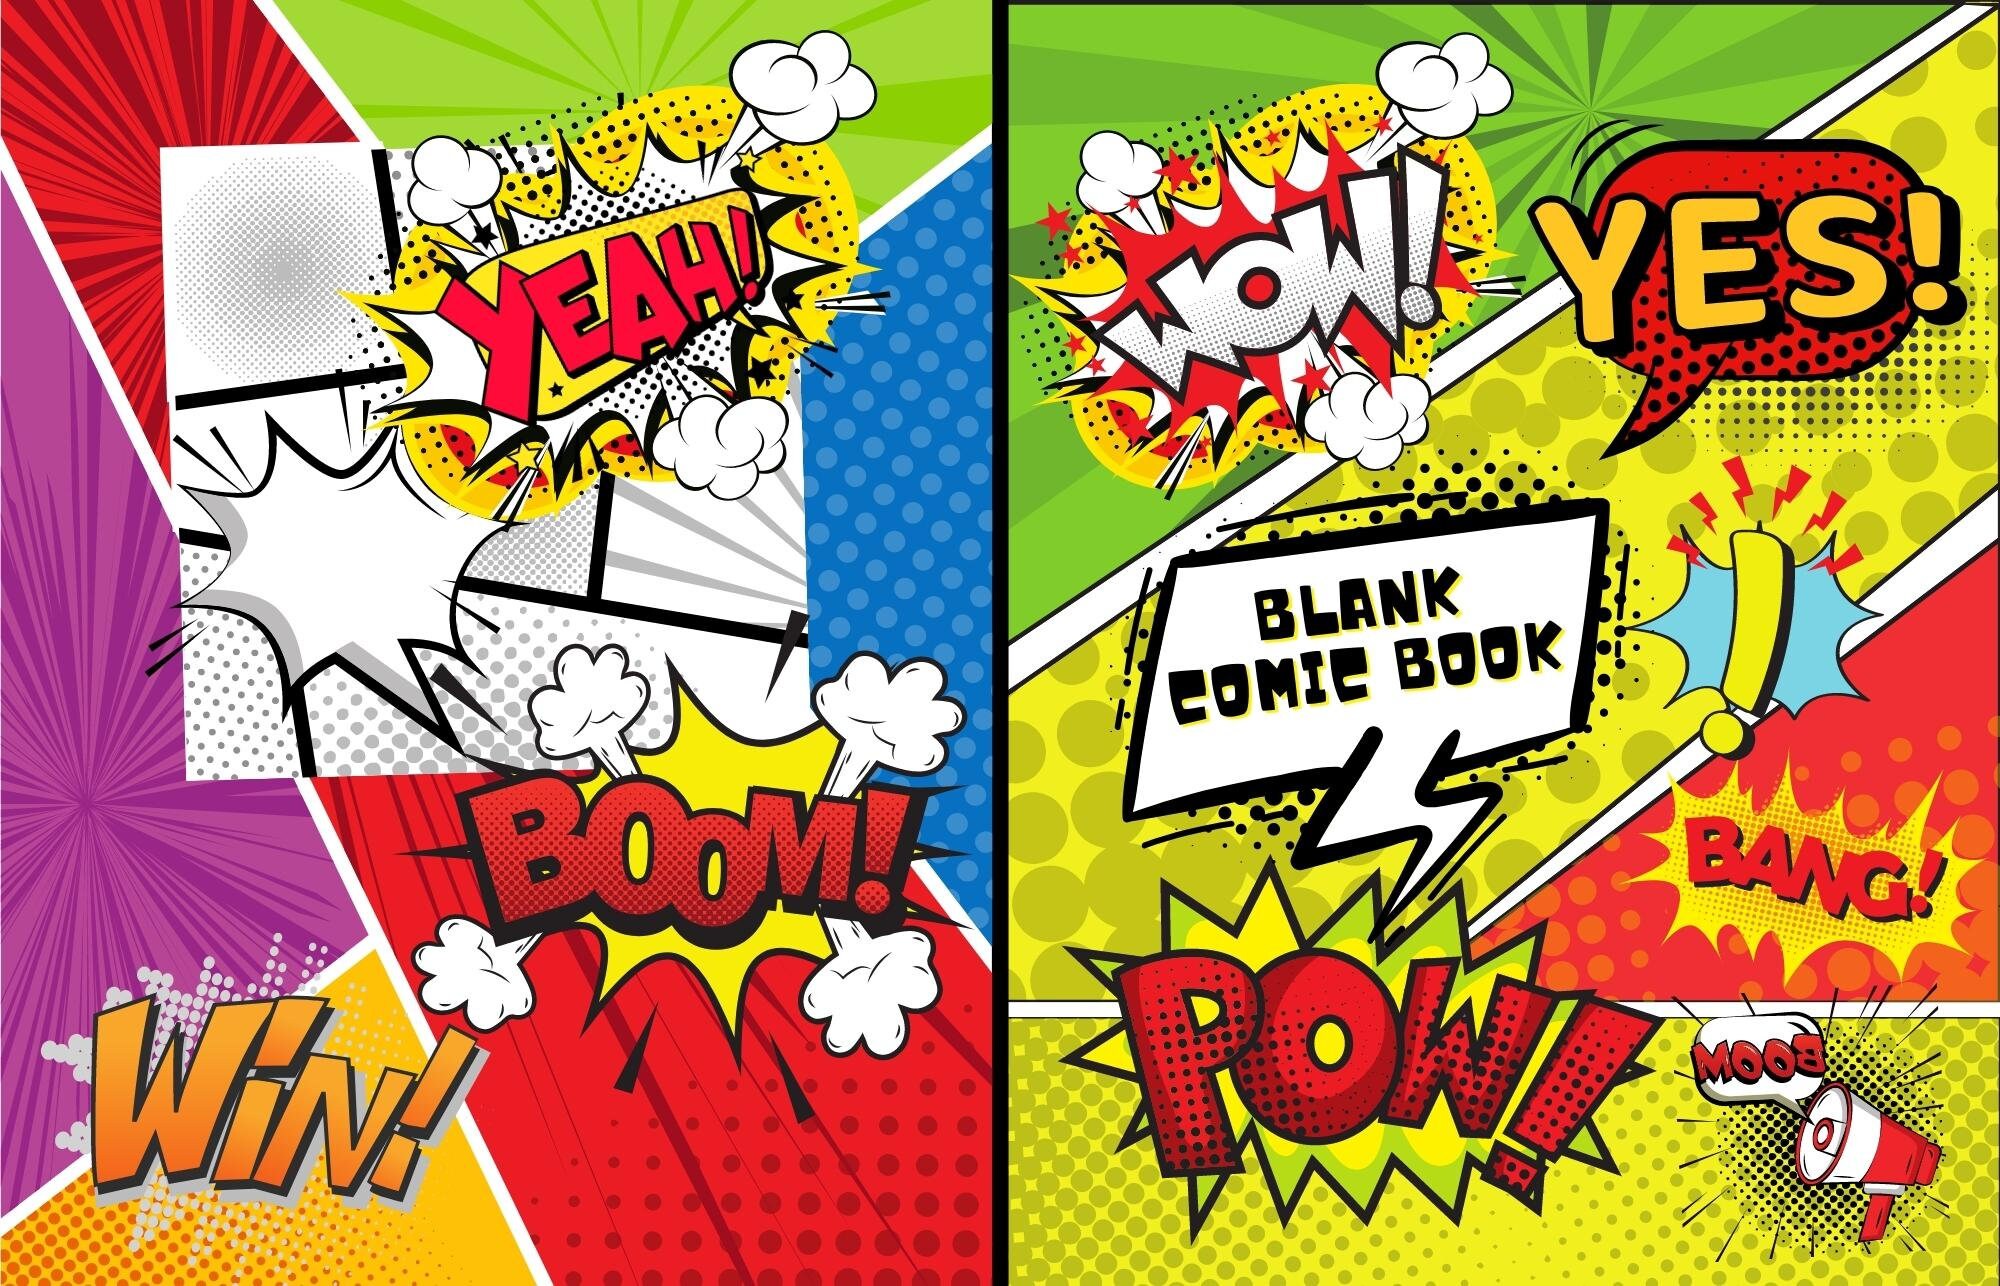 Blank Comic Book Template! 100 Page Printable or Digital Blank Comic Book  To Unleash Your Creativity!